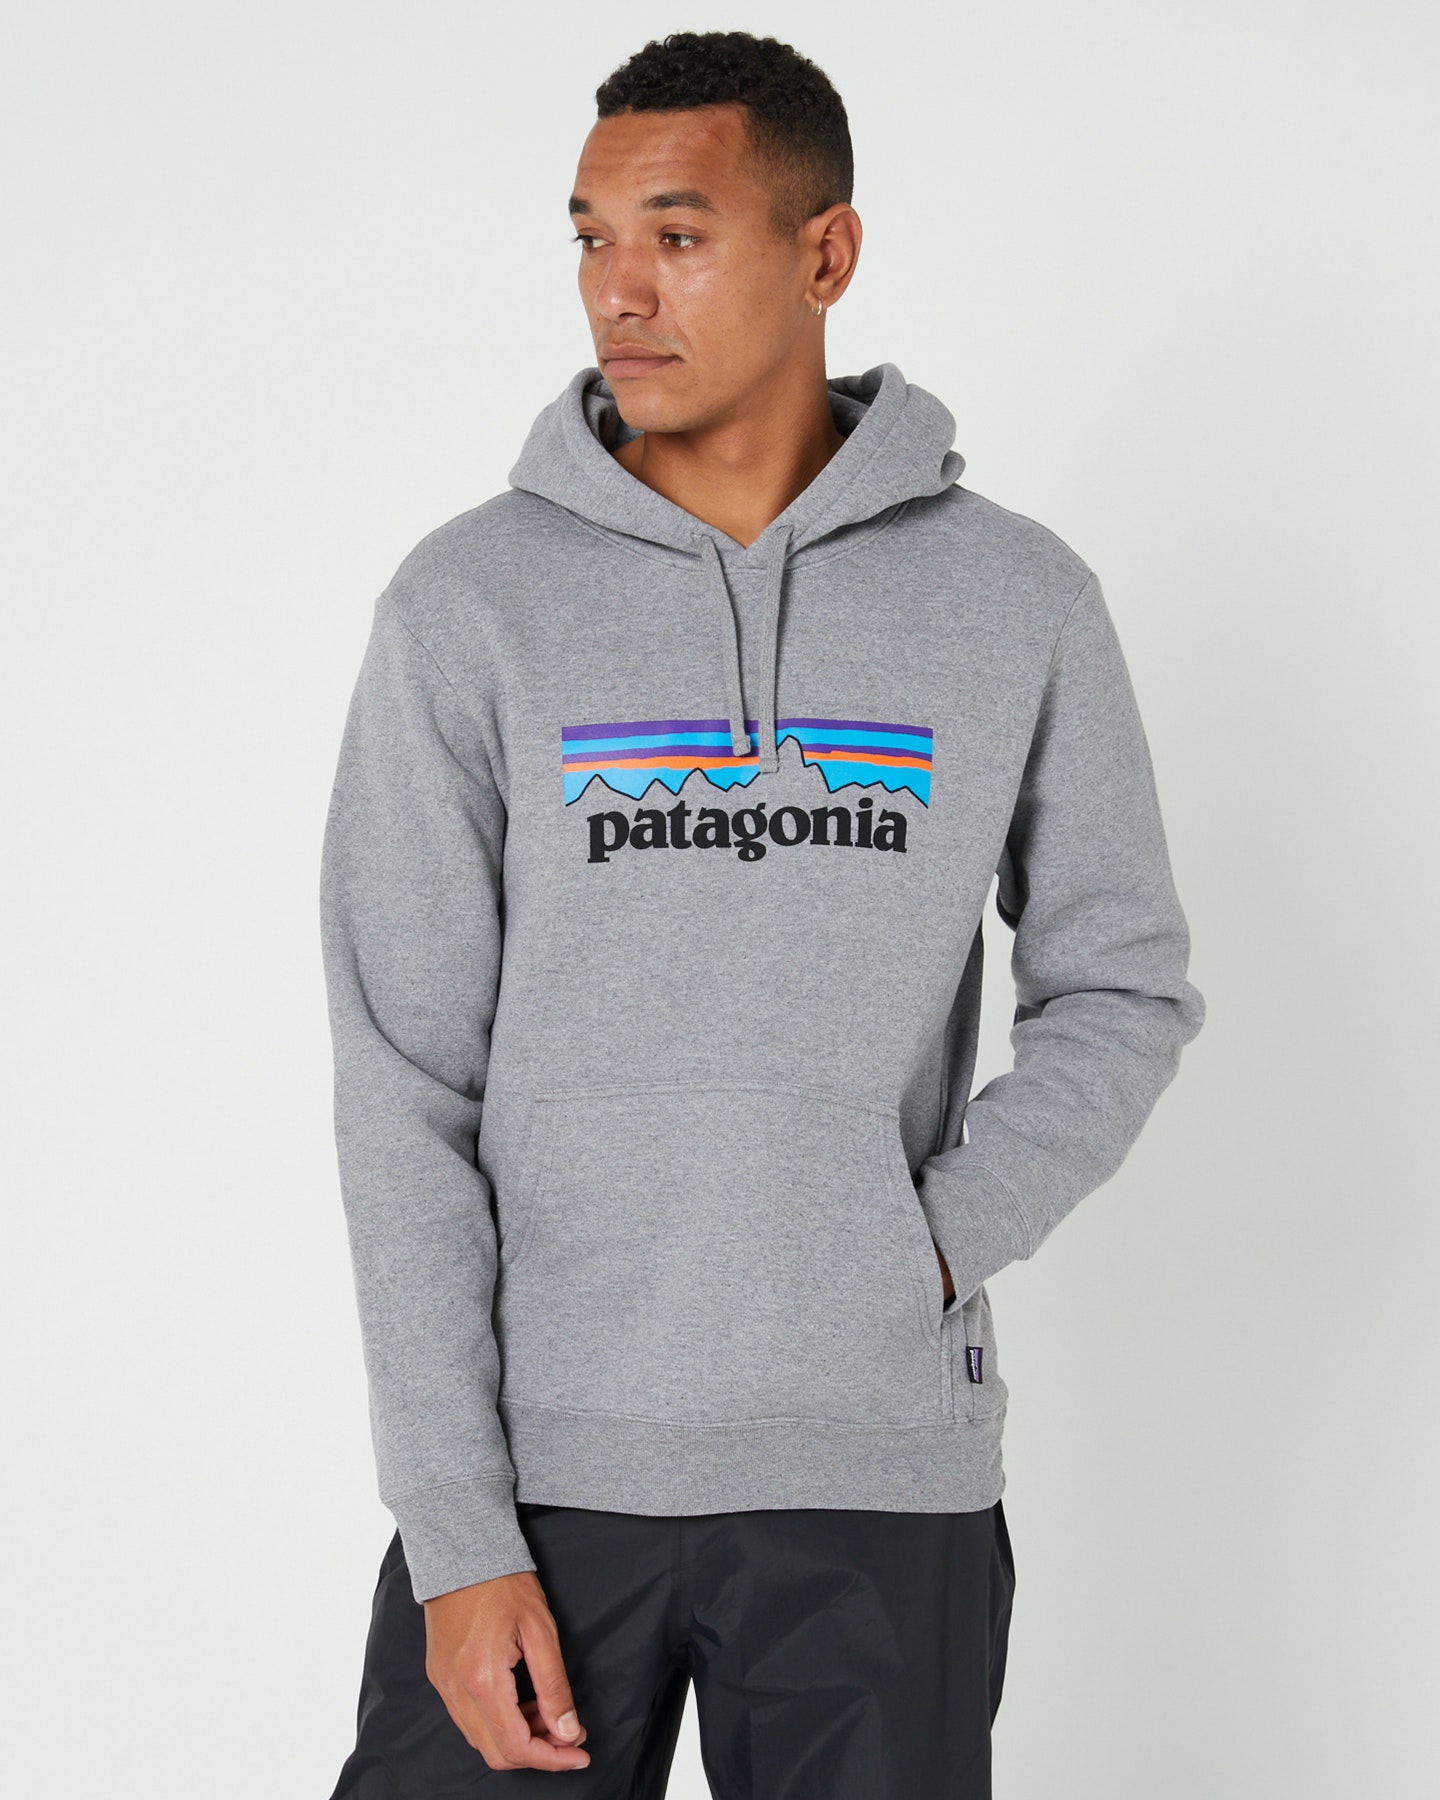 https://www.surfstitch.com/on/demandware.static/-/Sites-ss-master-catalog/default/dwfed71299/images/39622-GLH-XS/GREY-MENS-CLOTHING-PATAGONIA-HOODIES-39622-GLH-XS_1.JPG